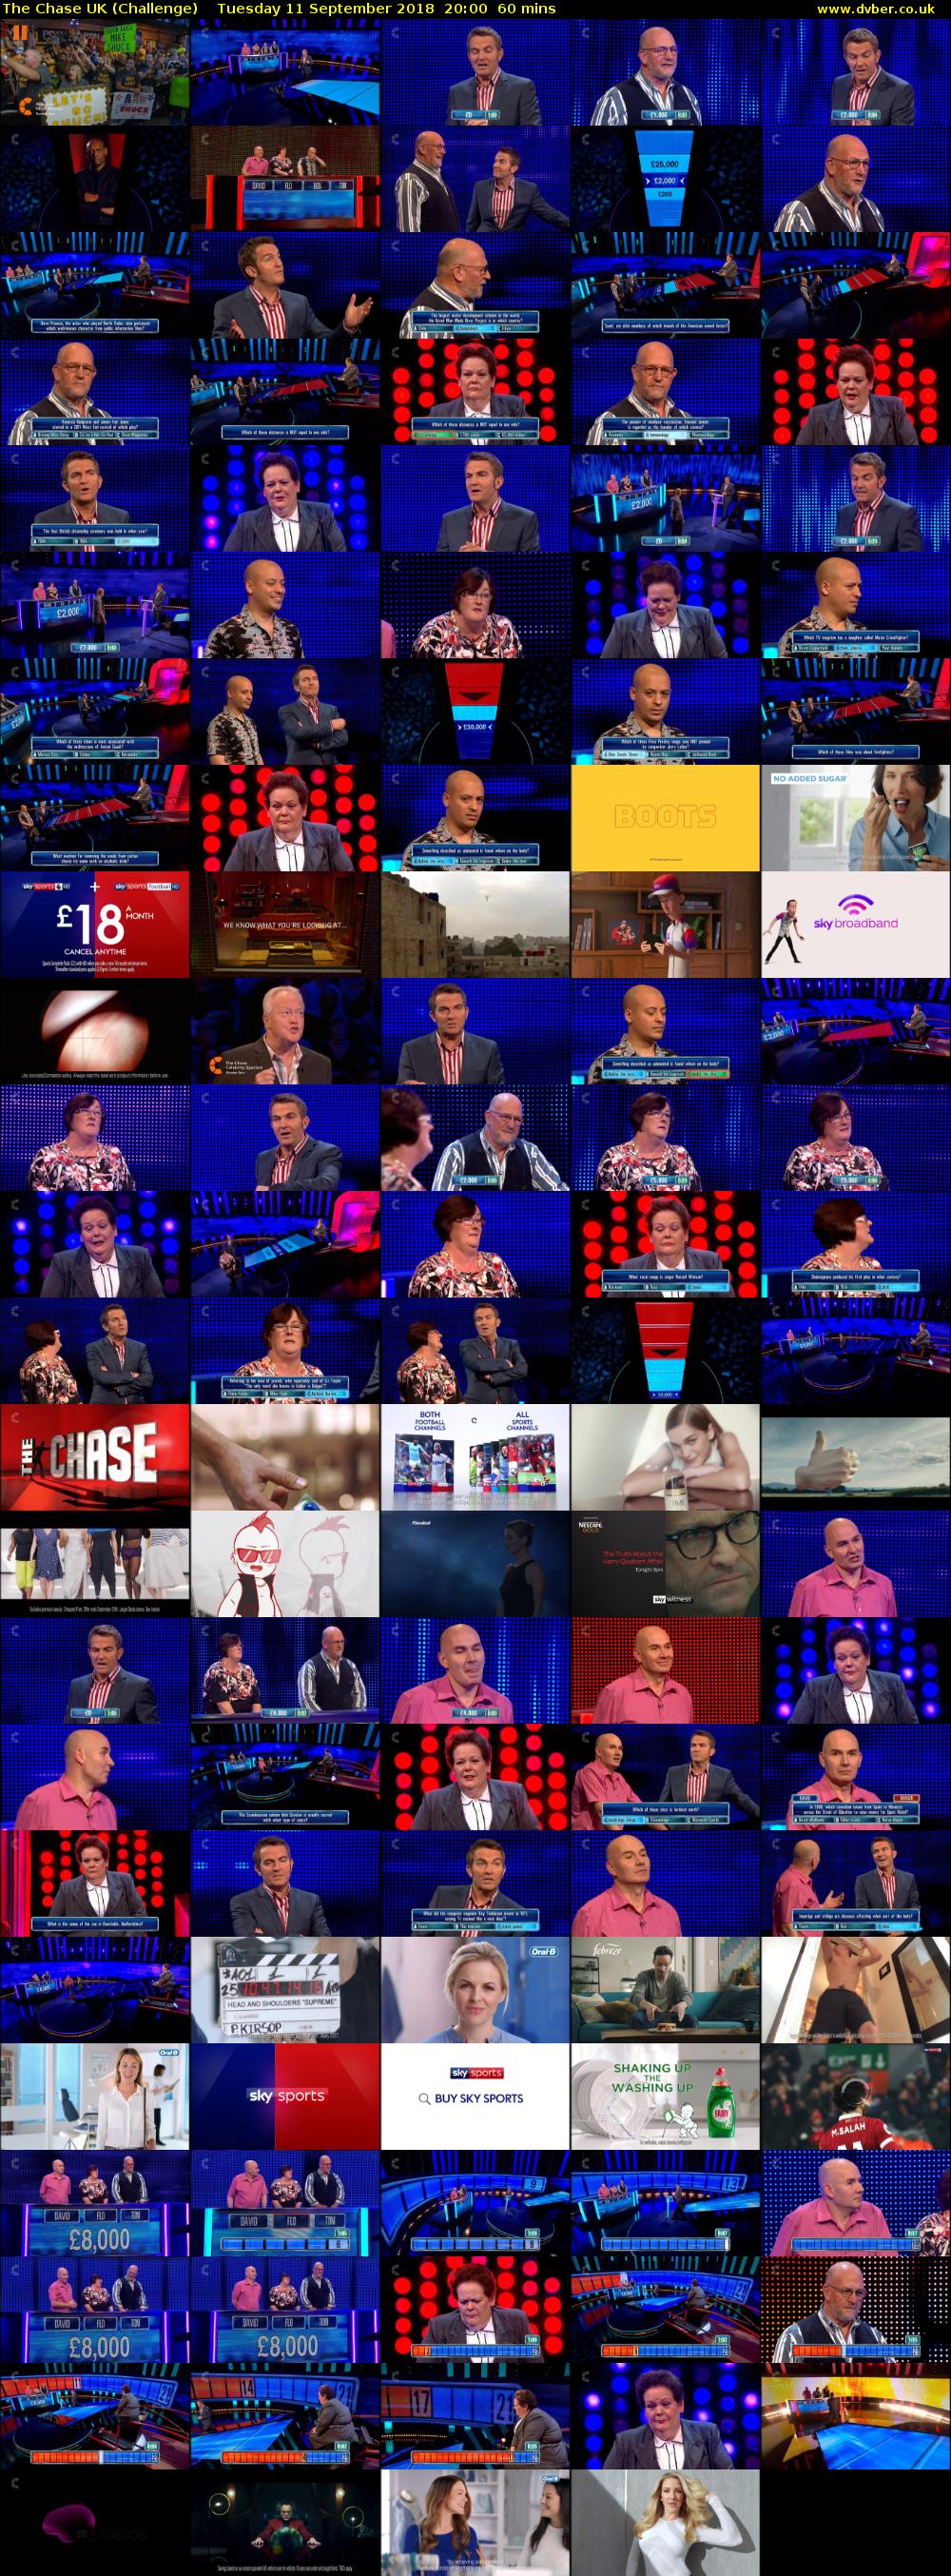 The Chase UK (Challenge) Tuesday 11 September 2018 20:00 - 21:00